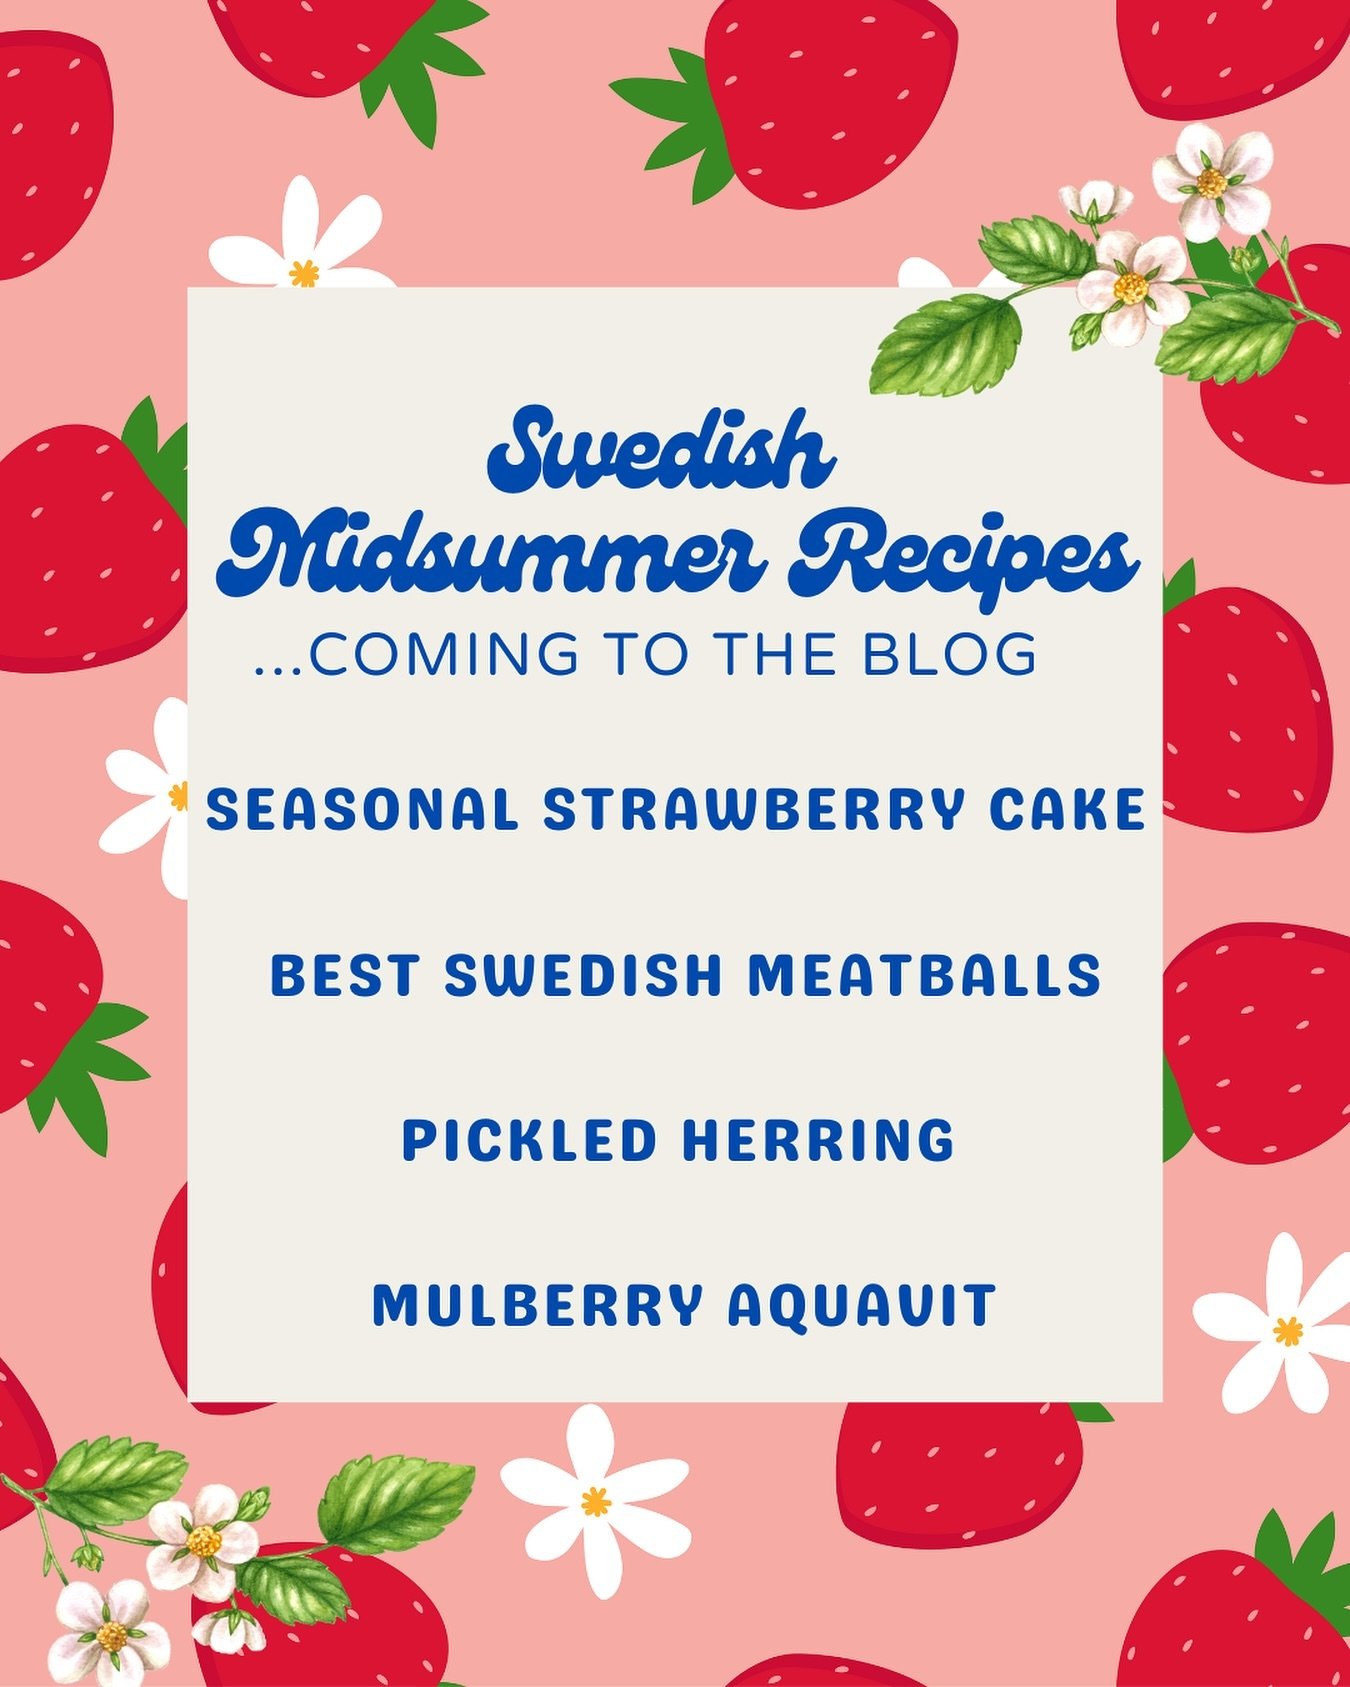 Cannot WAIT to share my Swedish Midsummer recipes with you on the blog! And who knows, maybe some of these dishes might end up on a secret menu at my pop ups throughout the month of June 👀

Midsummer is one of the most celebrated holidays in Sweden 